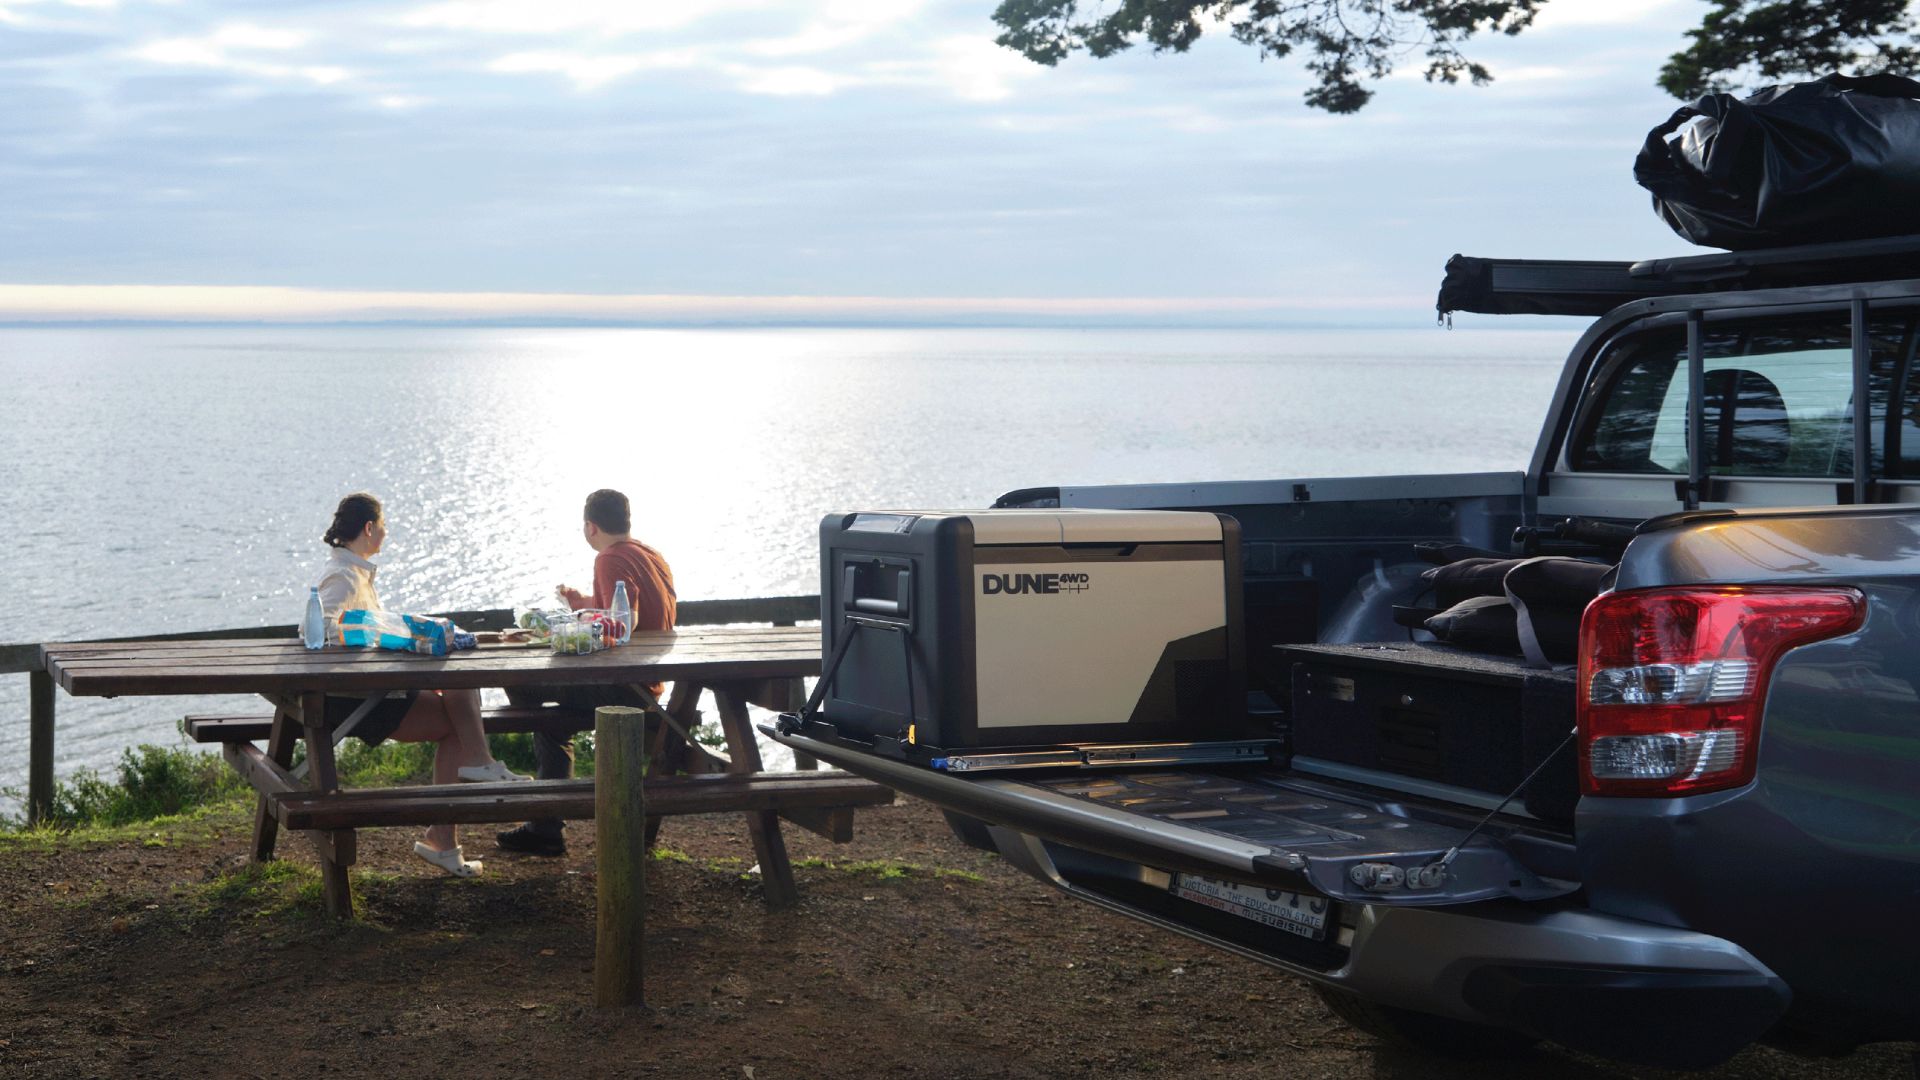 2 People enjoying ocean view from a park bench with a DUNE 4WD 45L Single Zone Fridge/Freezer